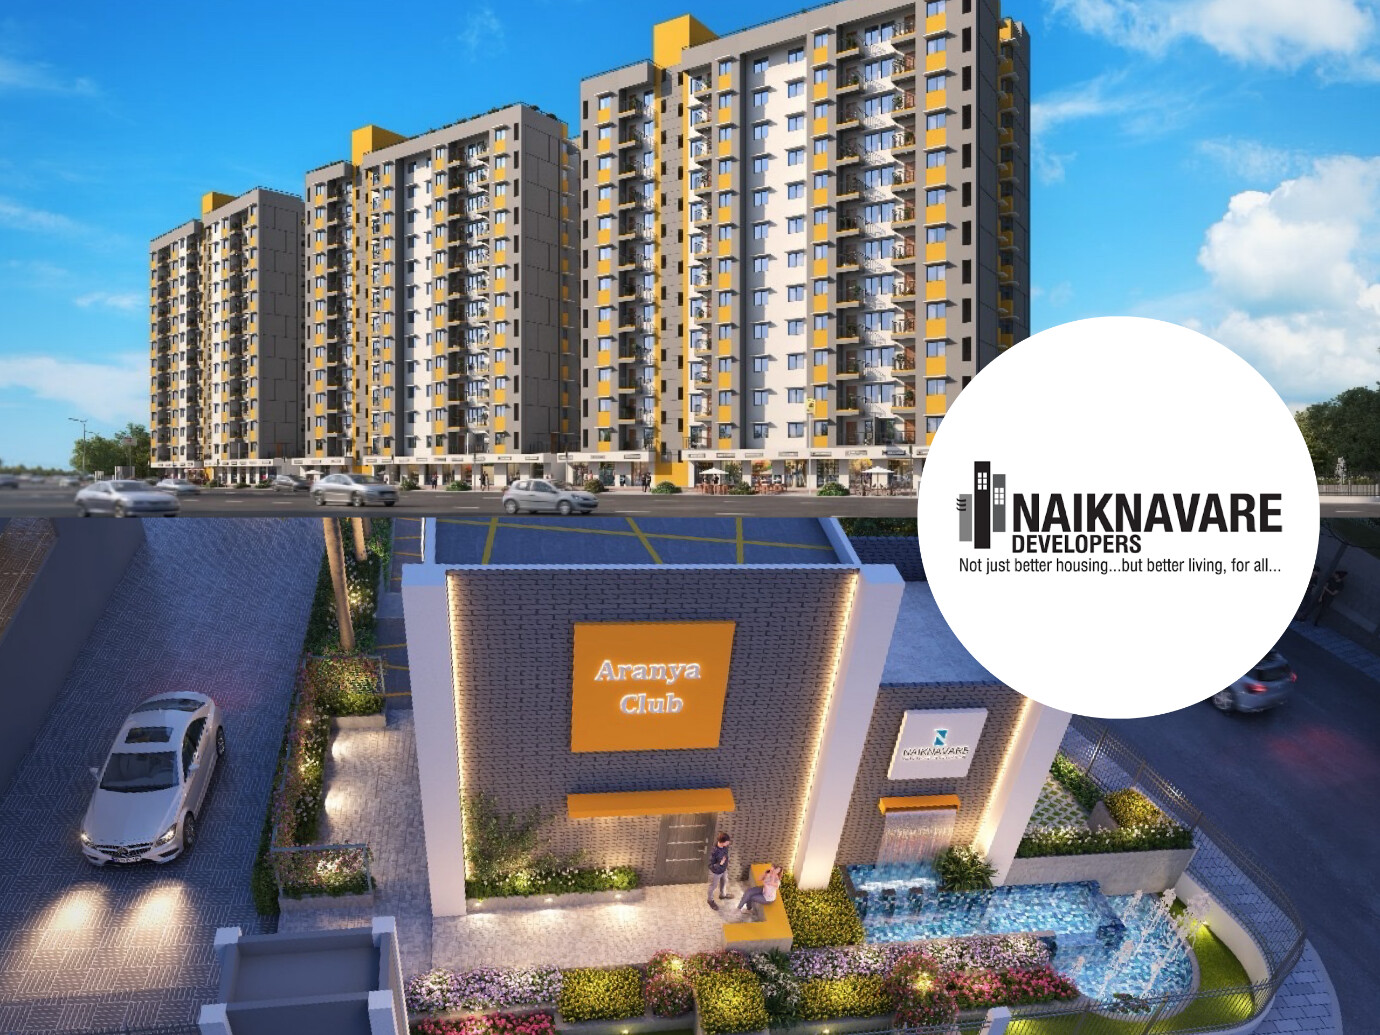 Naiknavare Developers Announces the Launch of its New Residential Project ‘Aranya’ in Talegaon